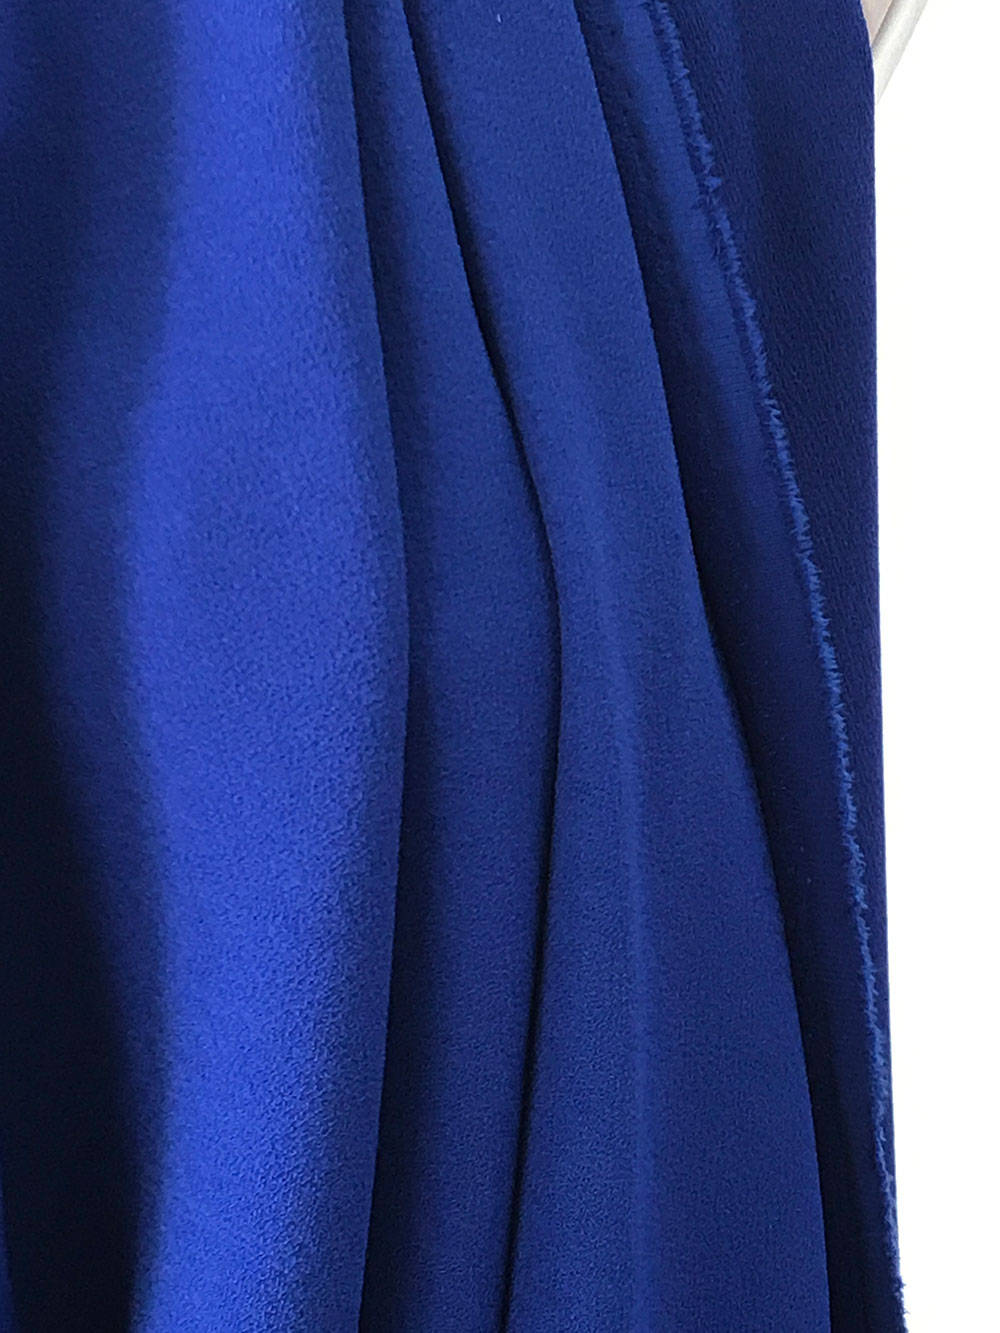 Cobalt blue stretch crepe fabric 2 way stretch pebble crepe textured polyester spandex 150cm 60 inches